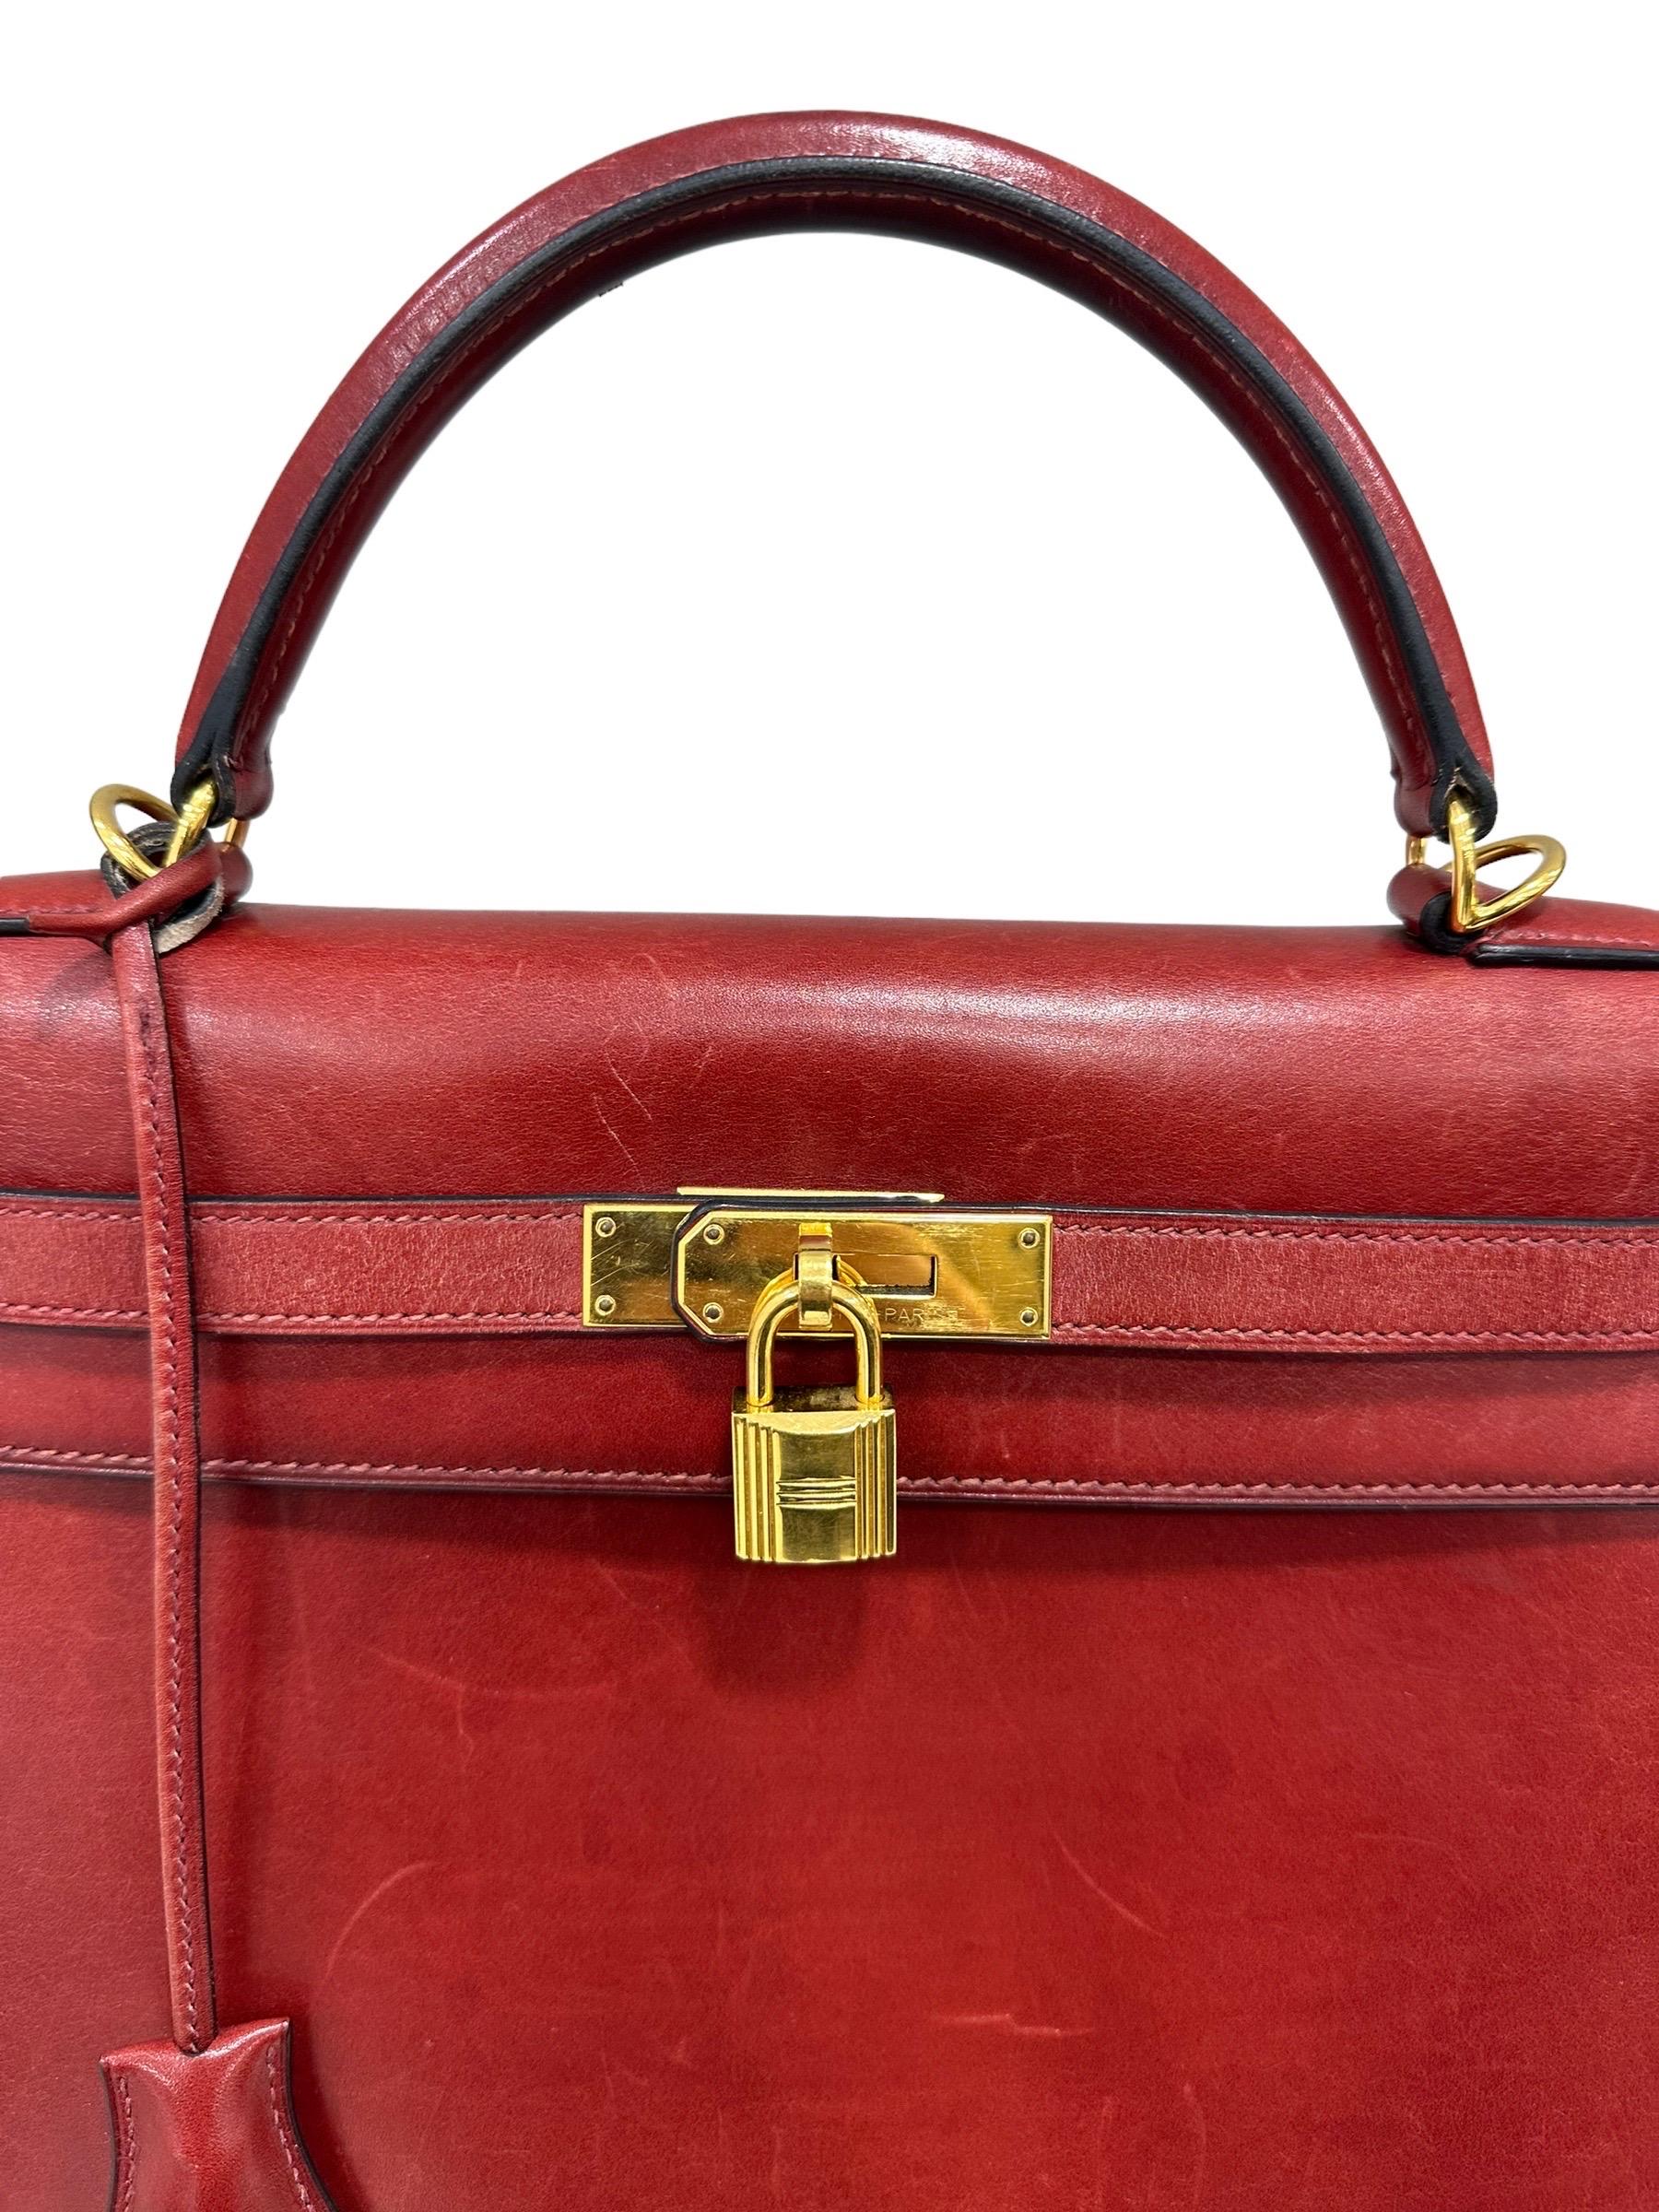 Bag signed Hermès, model Kelly, size 32, made in Box Calf leather, very smooth and rigid, in the Rouge H colorway with gold hardware. Equipped with the classic flap with interlocking closure with horizontal band, padlock and keys. Equipped with a